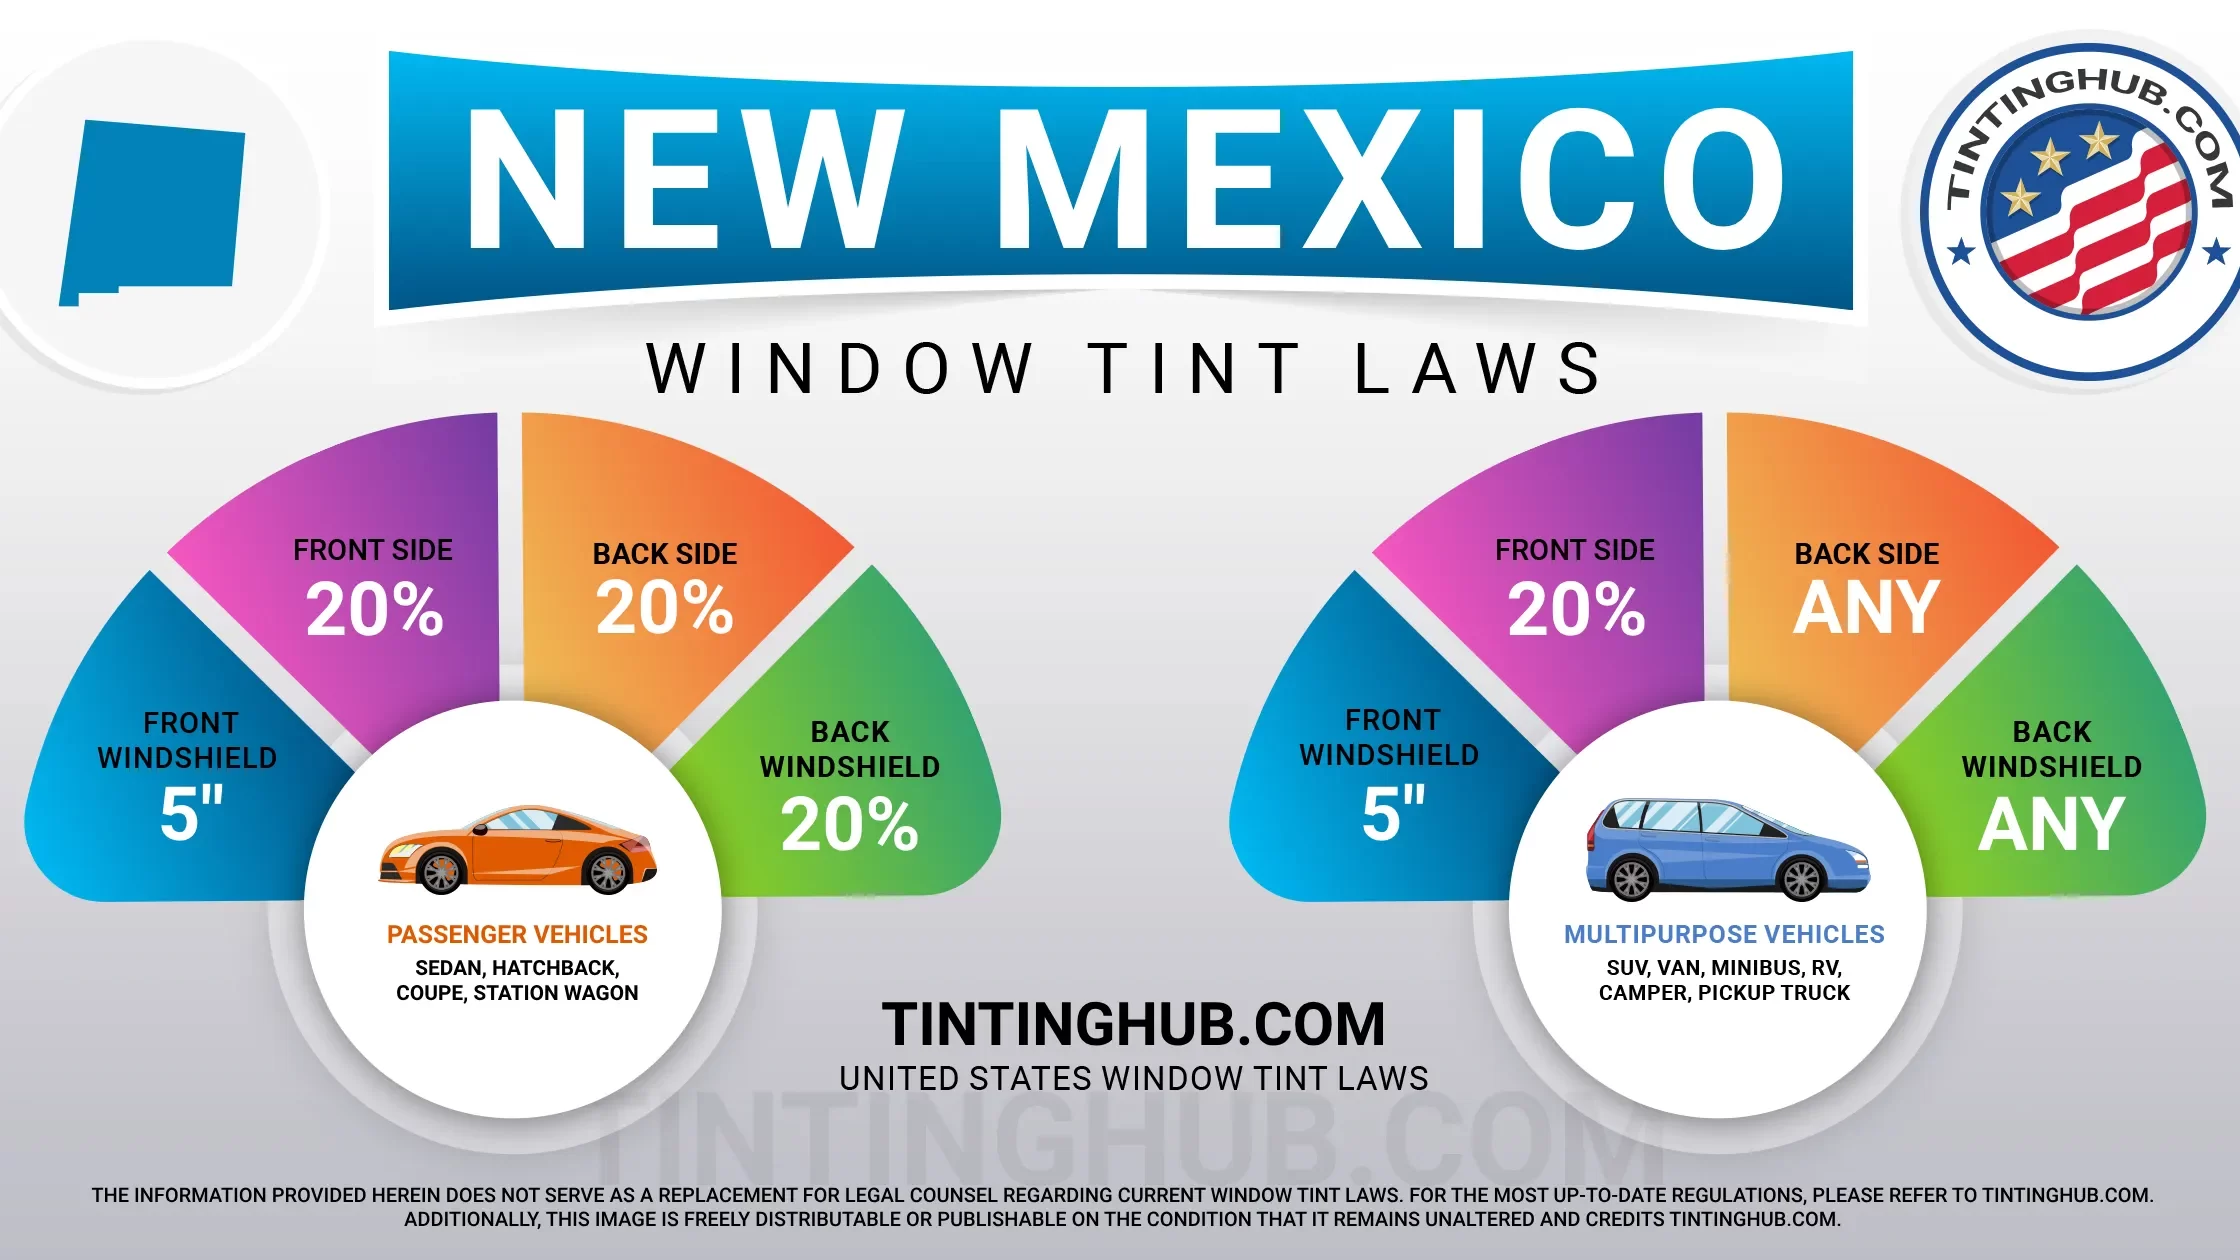 New Mexico Automobile Window Tint Laws